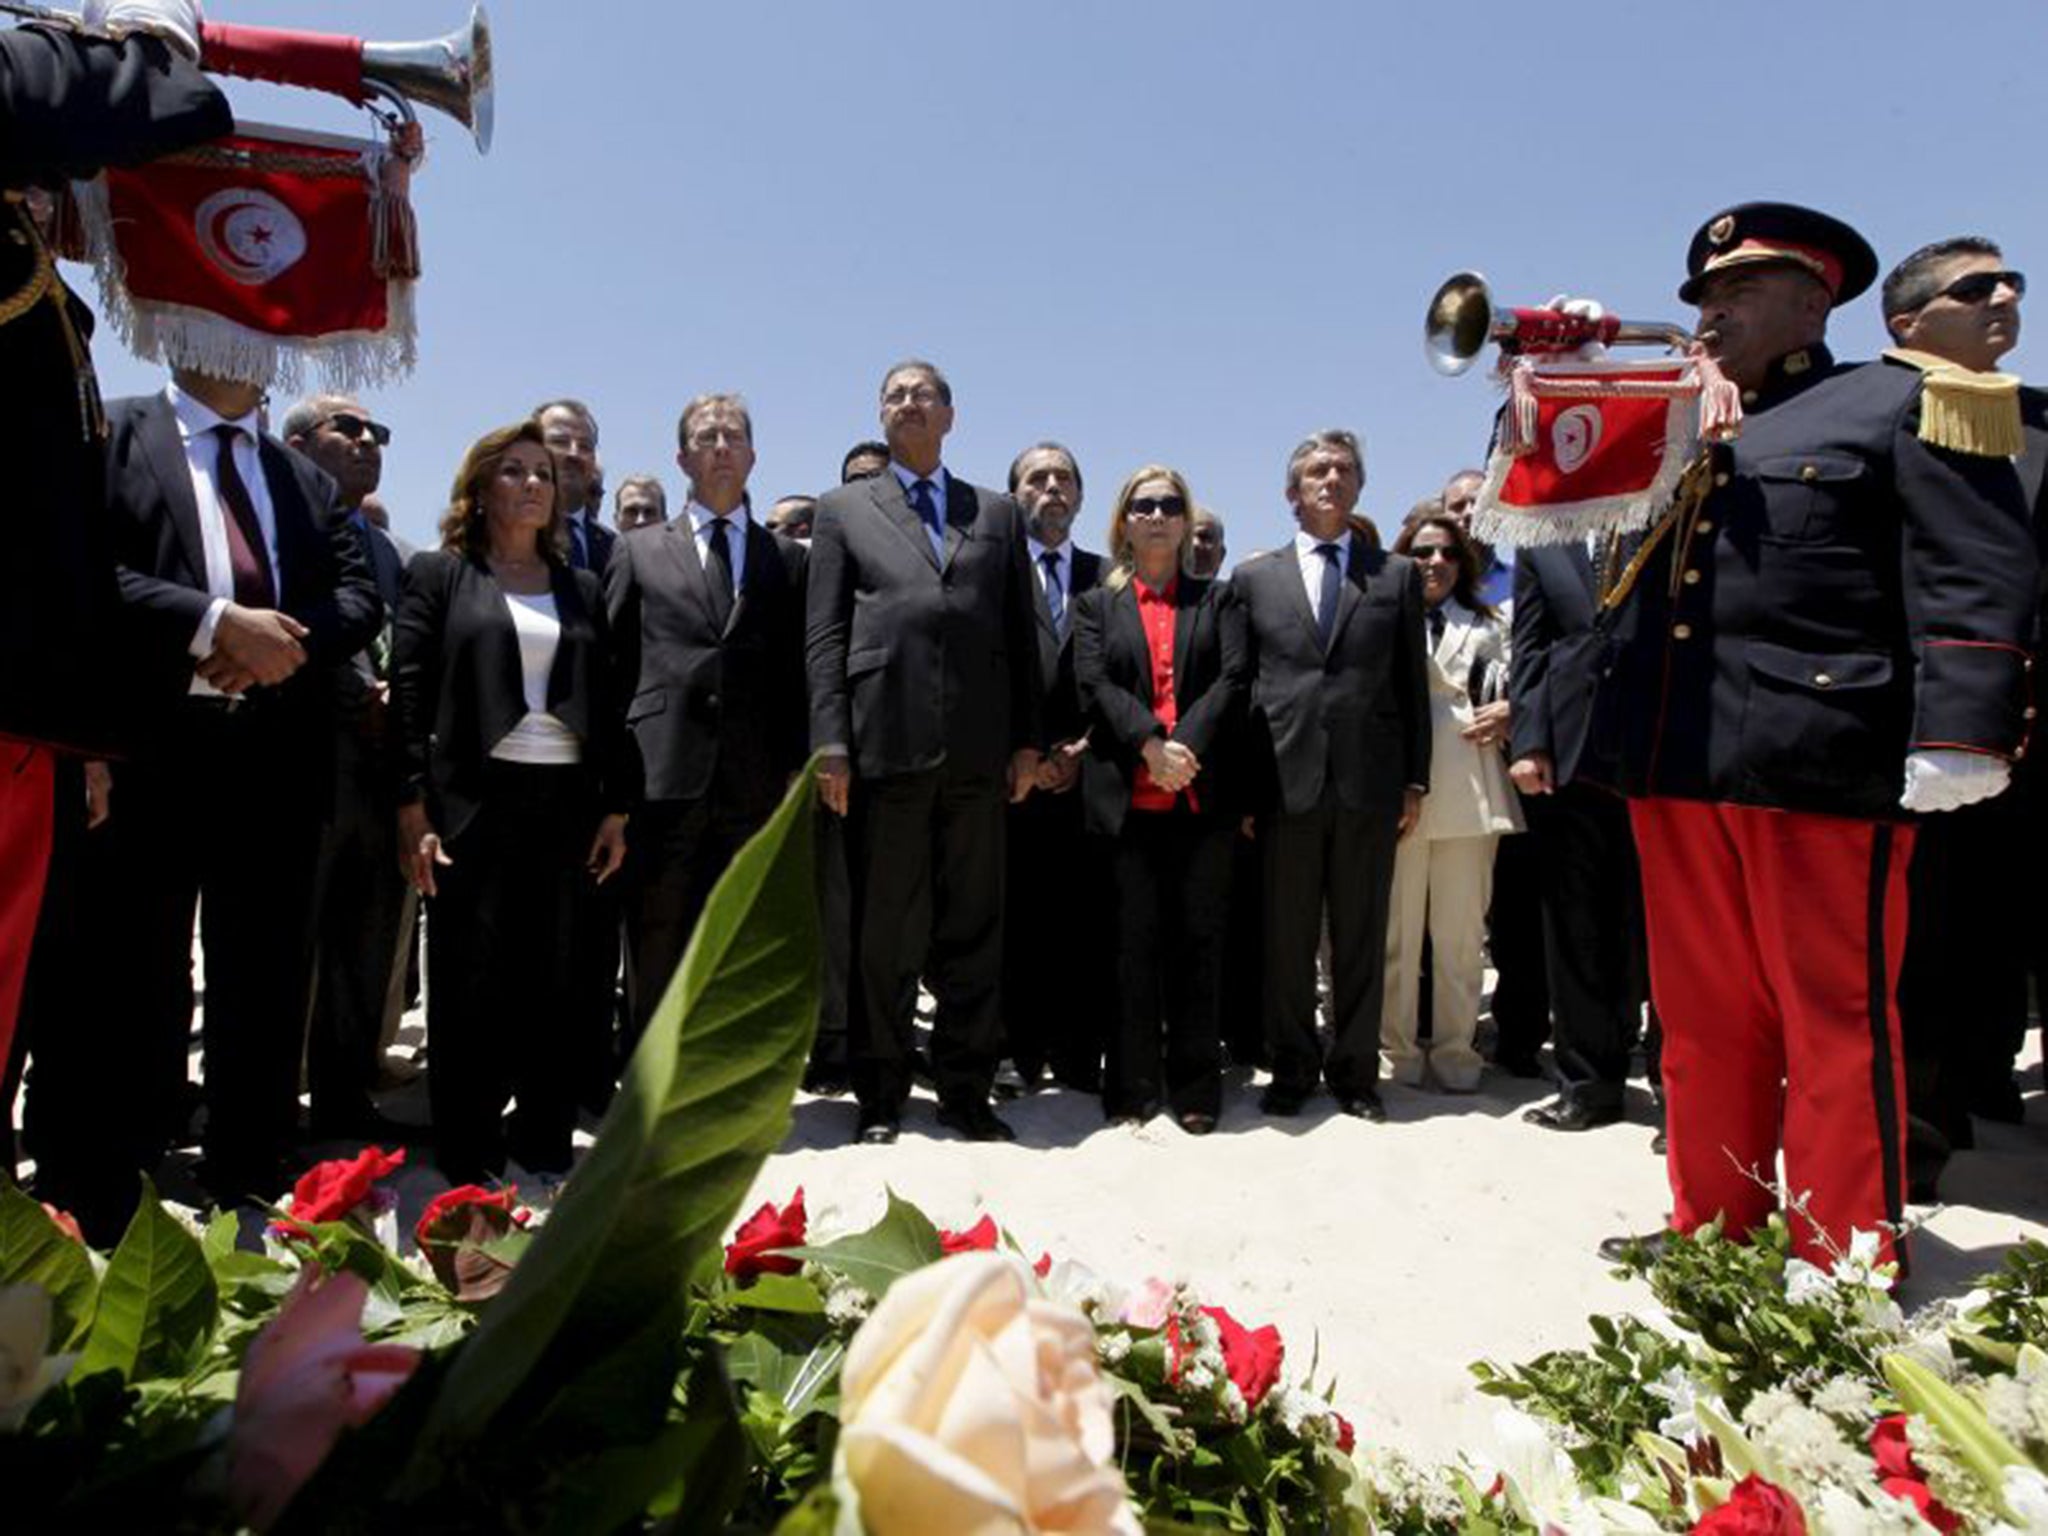 Tunisia’s Prime Minister Habib Essid, centre, observes a minute’s silence for the Sousse victims on Friday